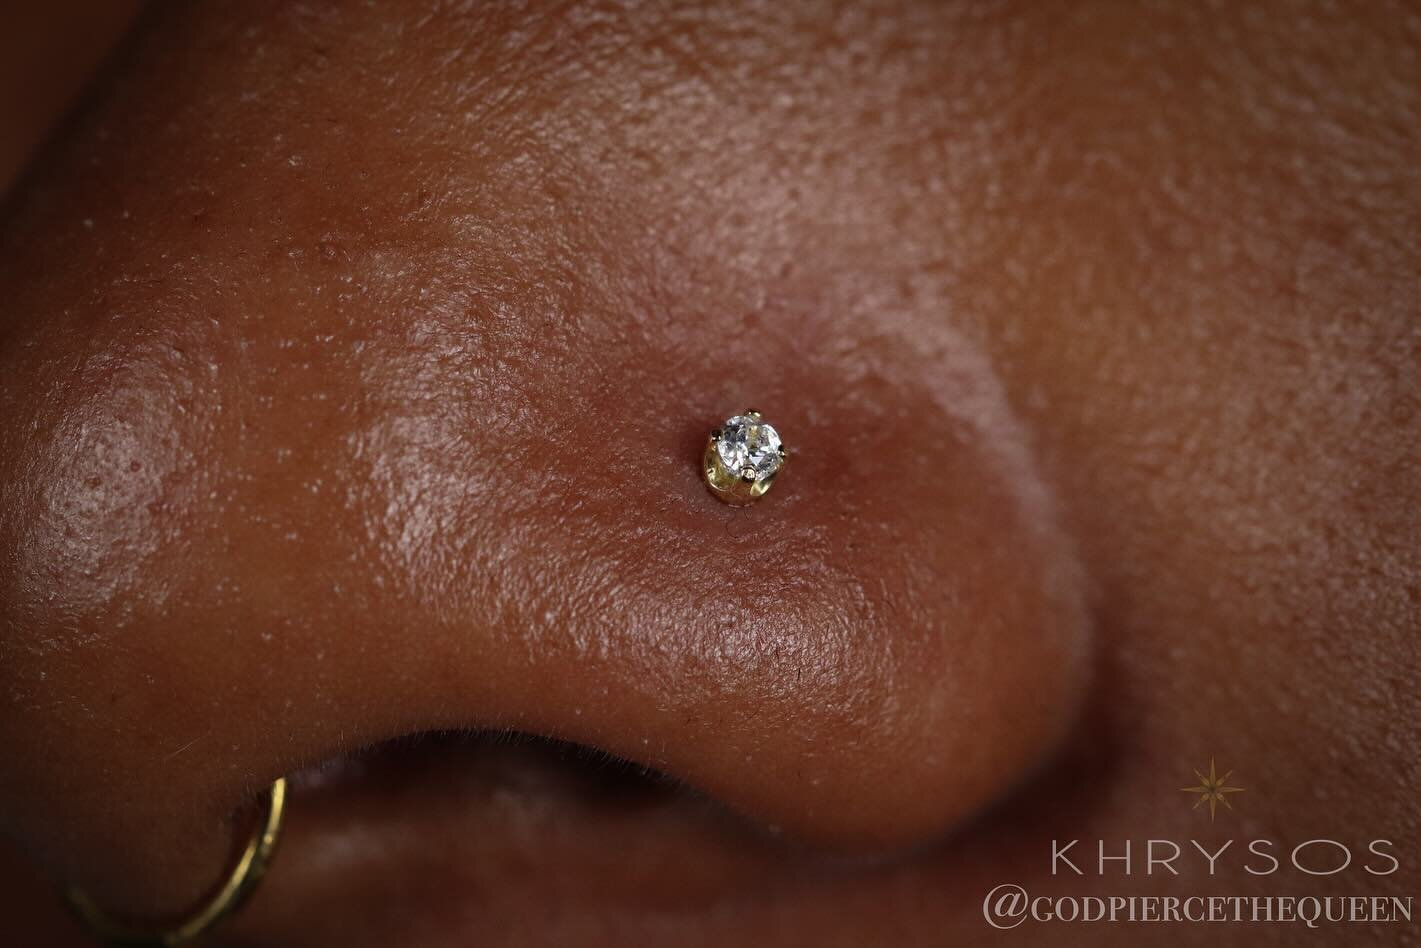 Two happy and healed nostril piercings I performed back in August. The first photo shows an 18k 2mm prong CZ from @khrysospiercingjewelry and the second photos is a titanium 3mm prong CZ from @divinitymetals 

For tattoos, check out @carboninkk @russ